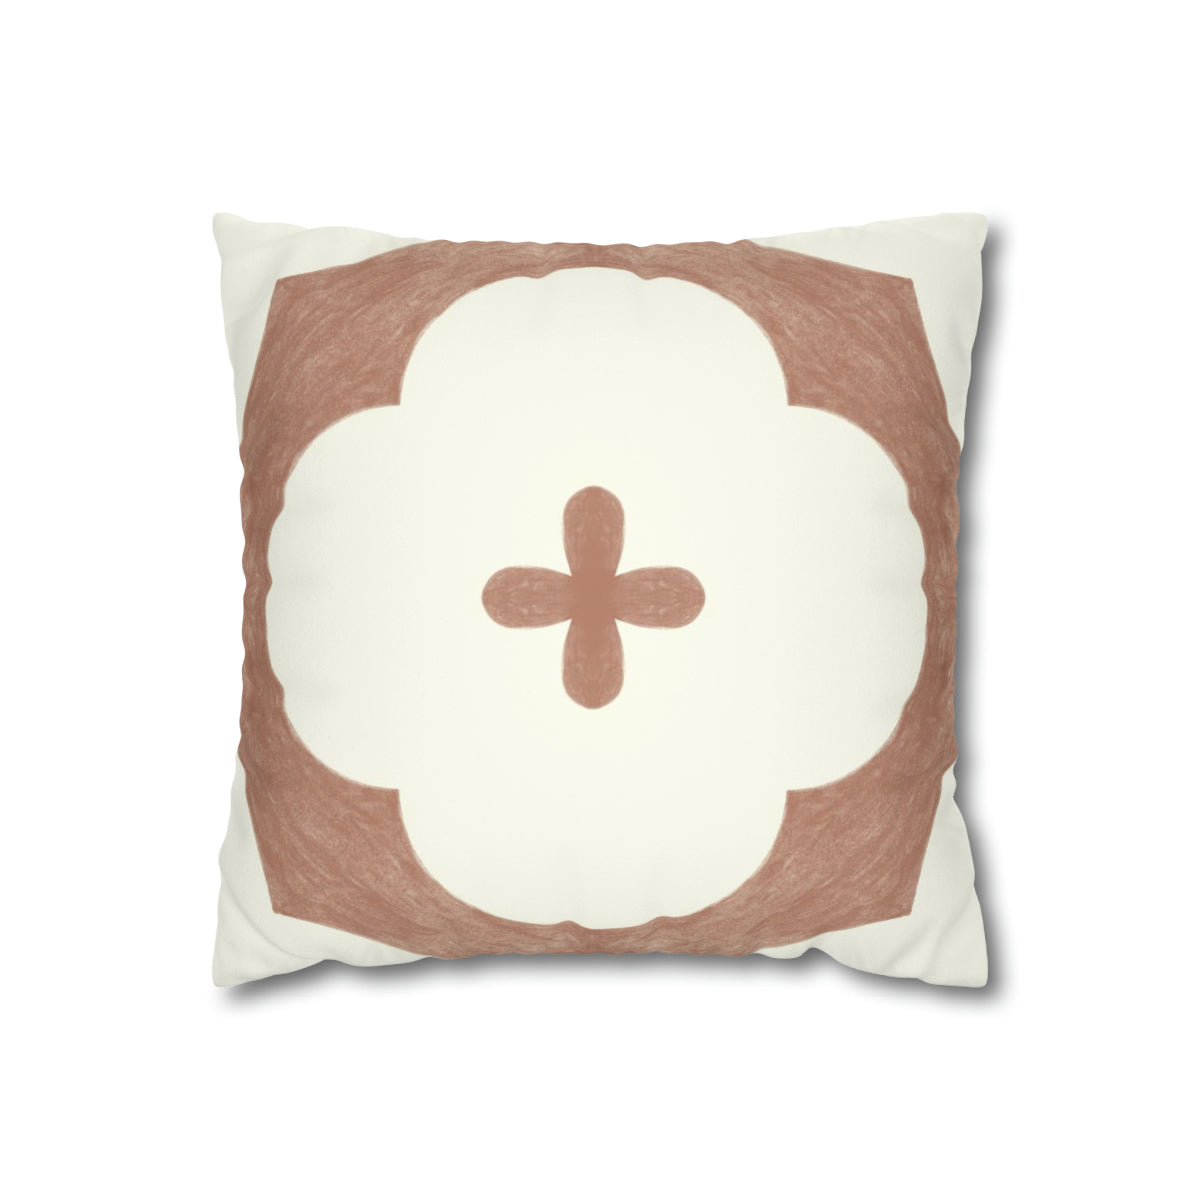 Claude Sienna Microsuede Square Pillow Cover